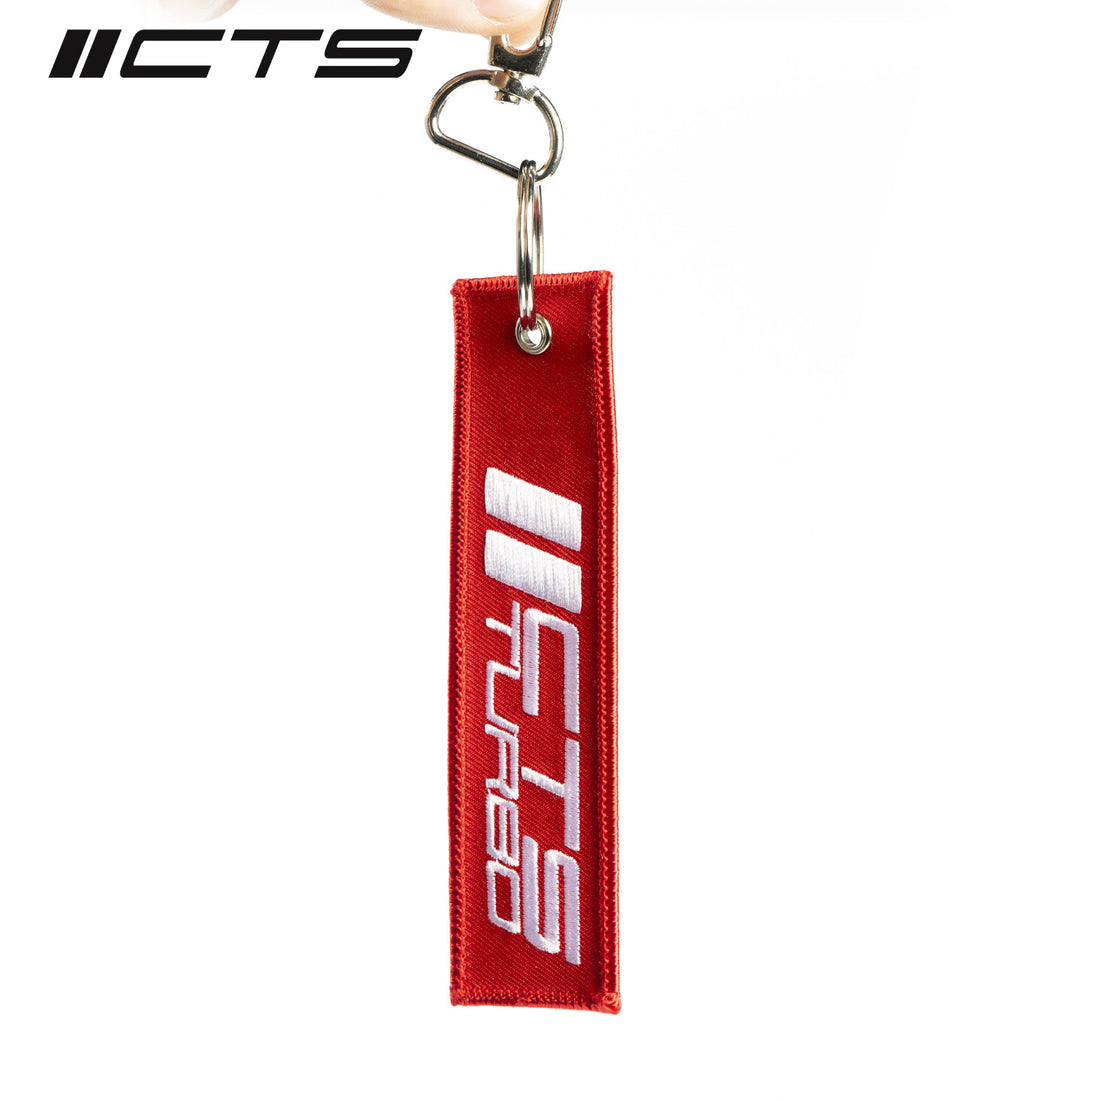 CTS Turbo Flight Tag - "Remove Before Flight" - Red CTS Turbo TAG-FLIGHT-RED